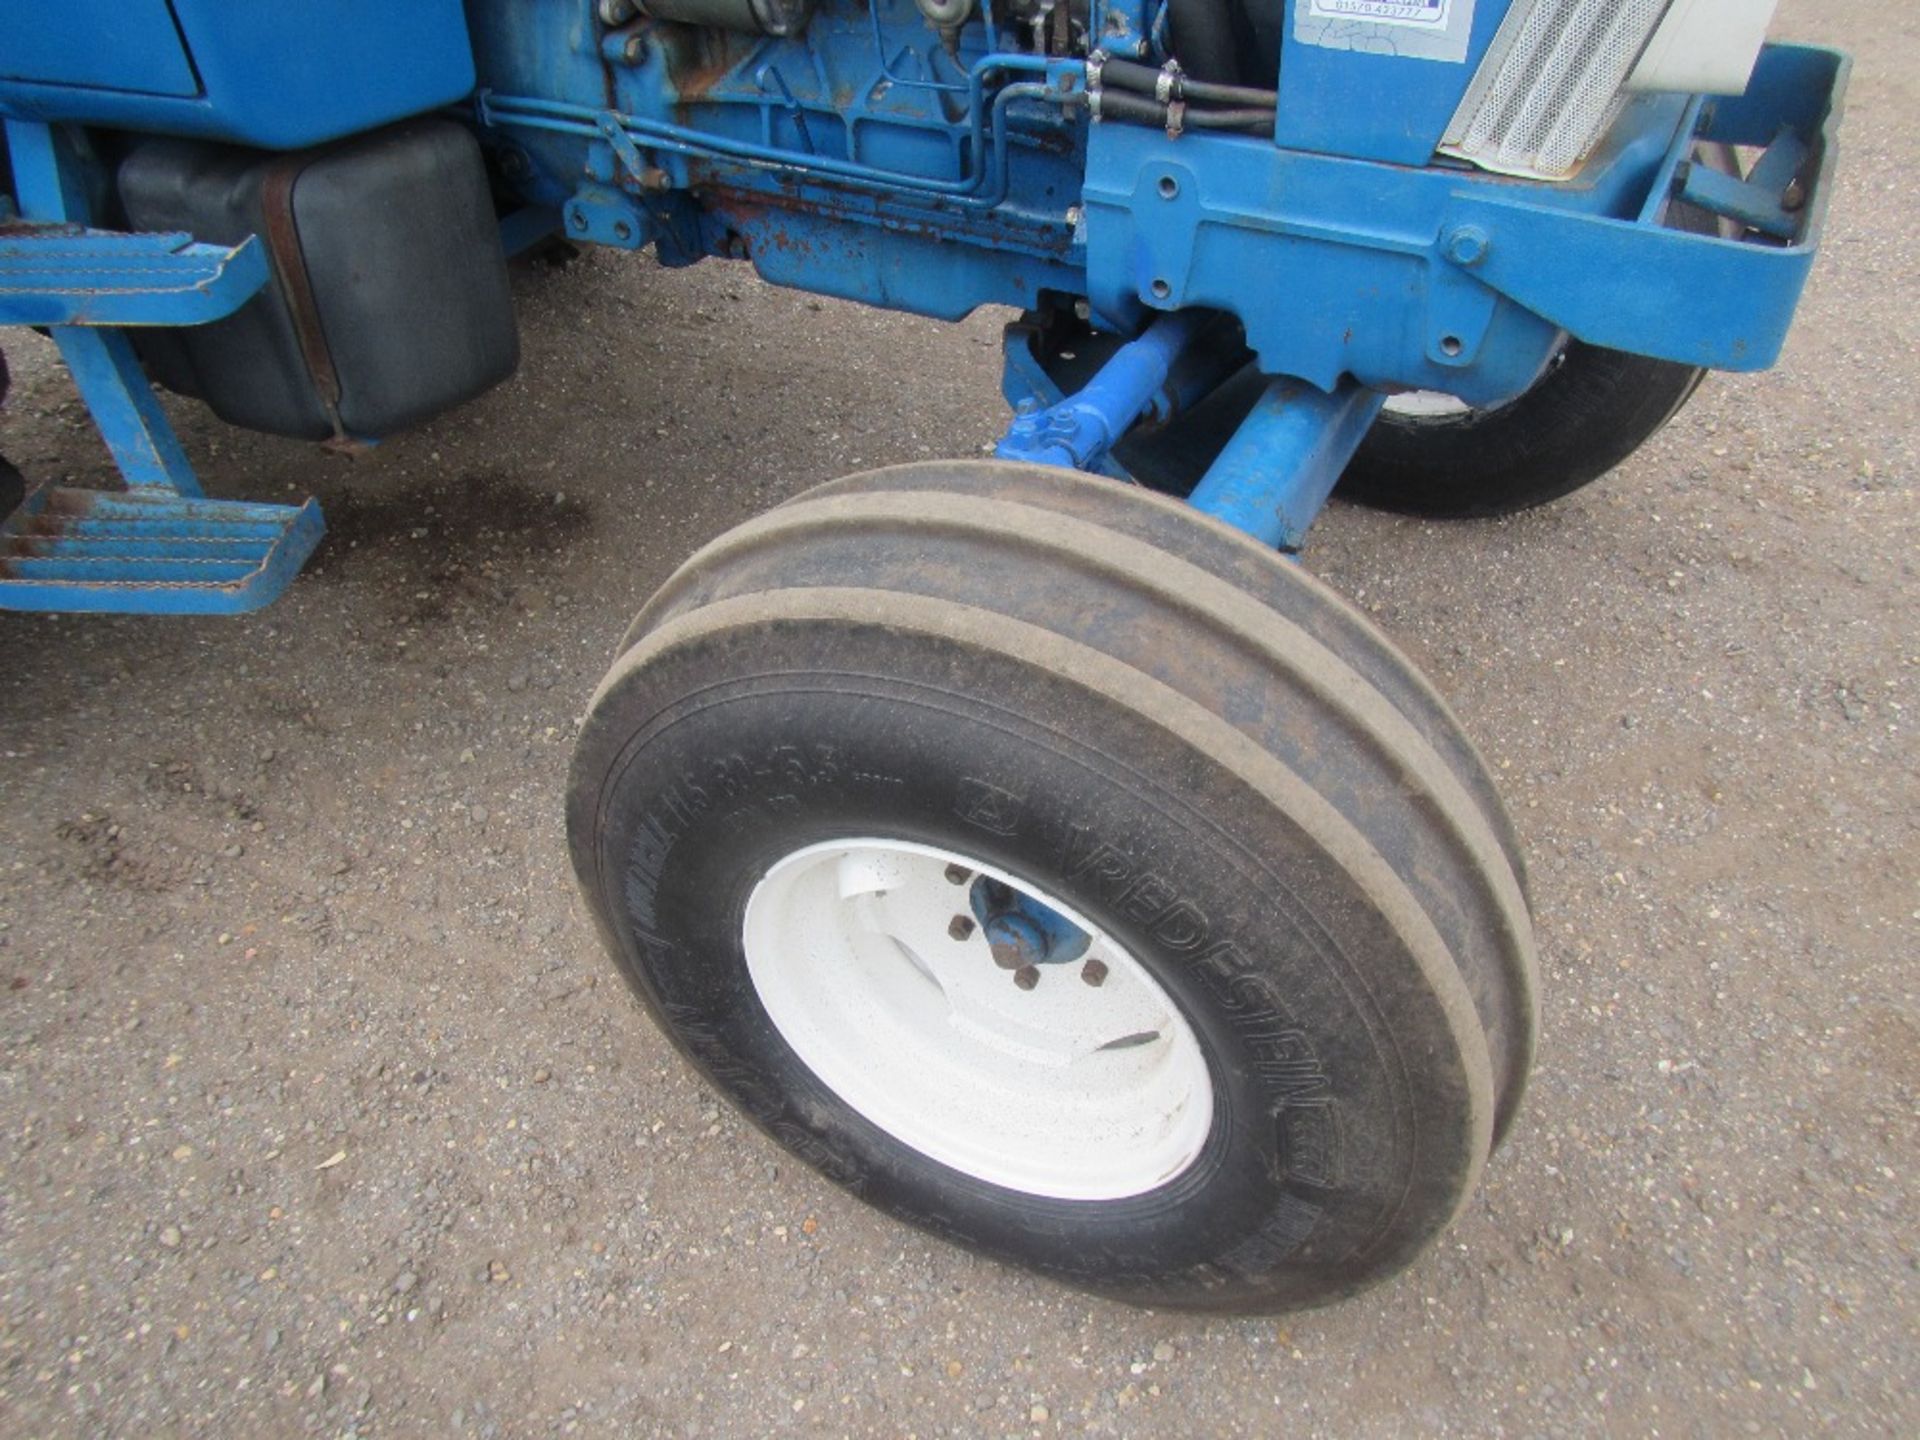 1988 Ford 6610 II 4cyl. Diesel Tractor c/w Super Q cab, 540/65R35 Rear & 11.5/80-15.3 front wheels & - Image 4 of 16